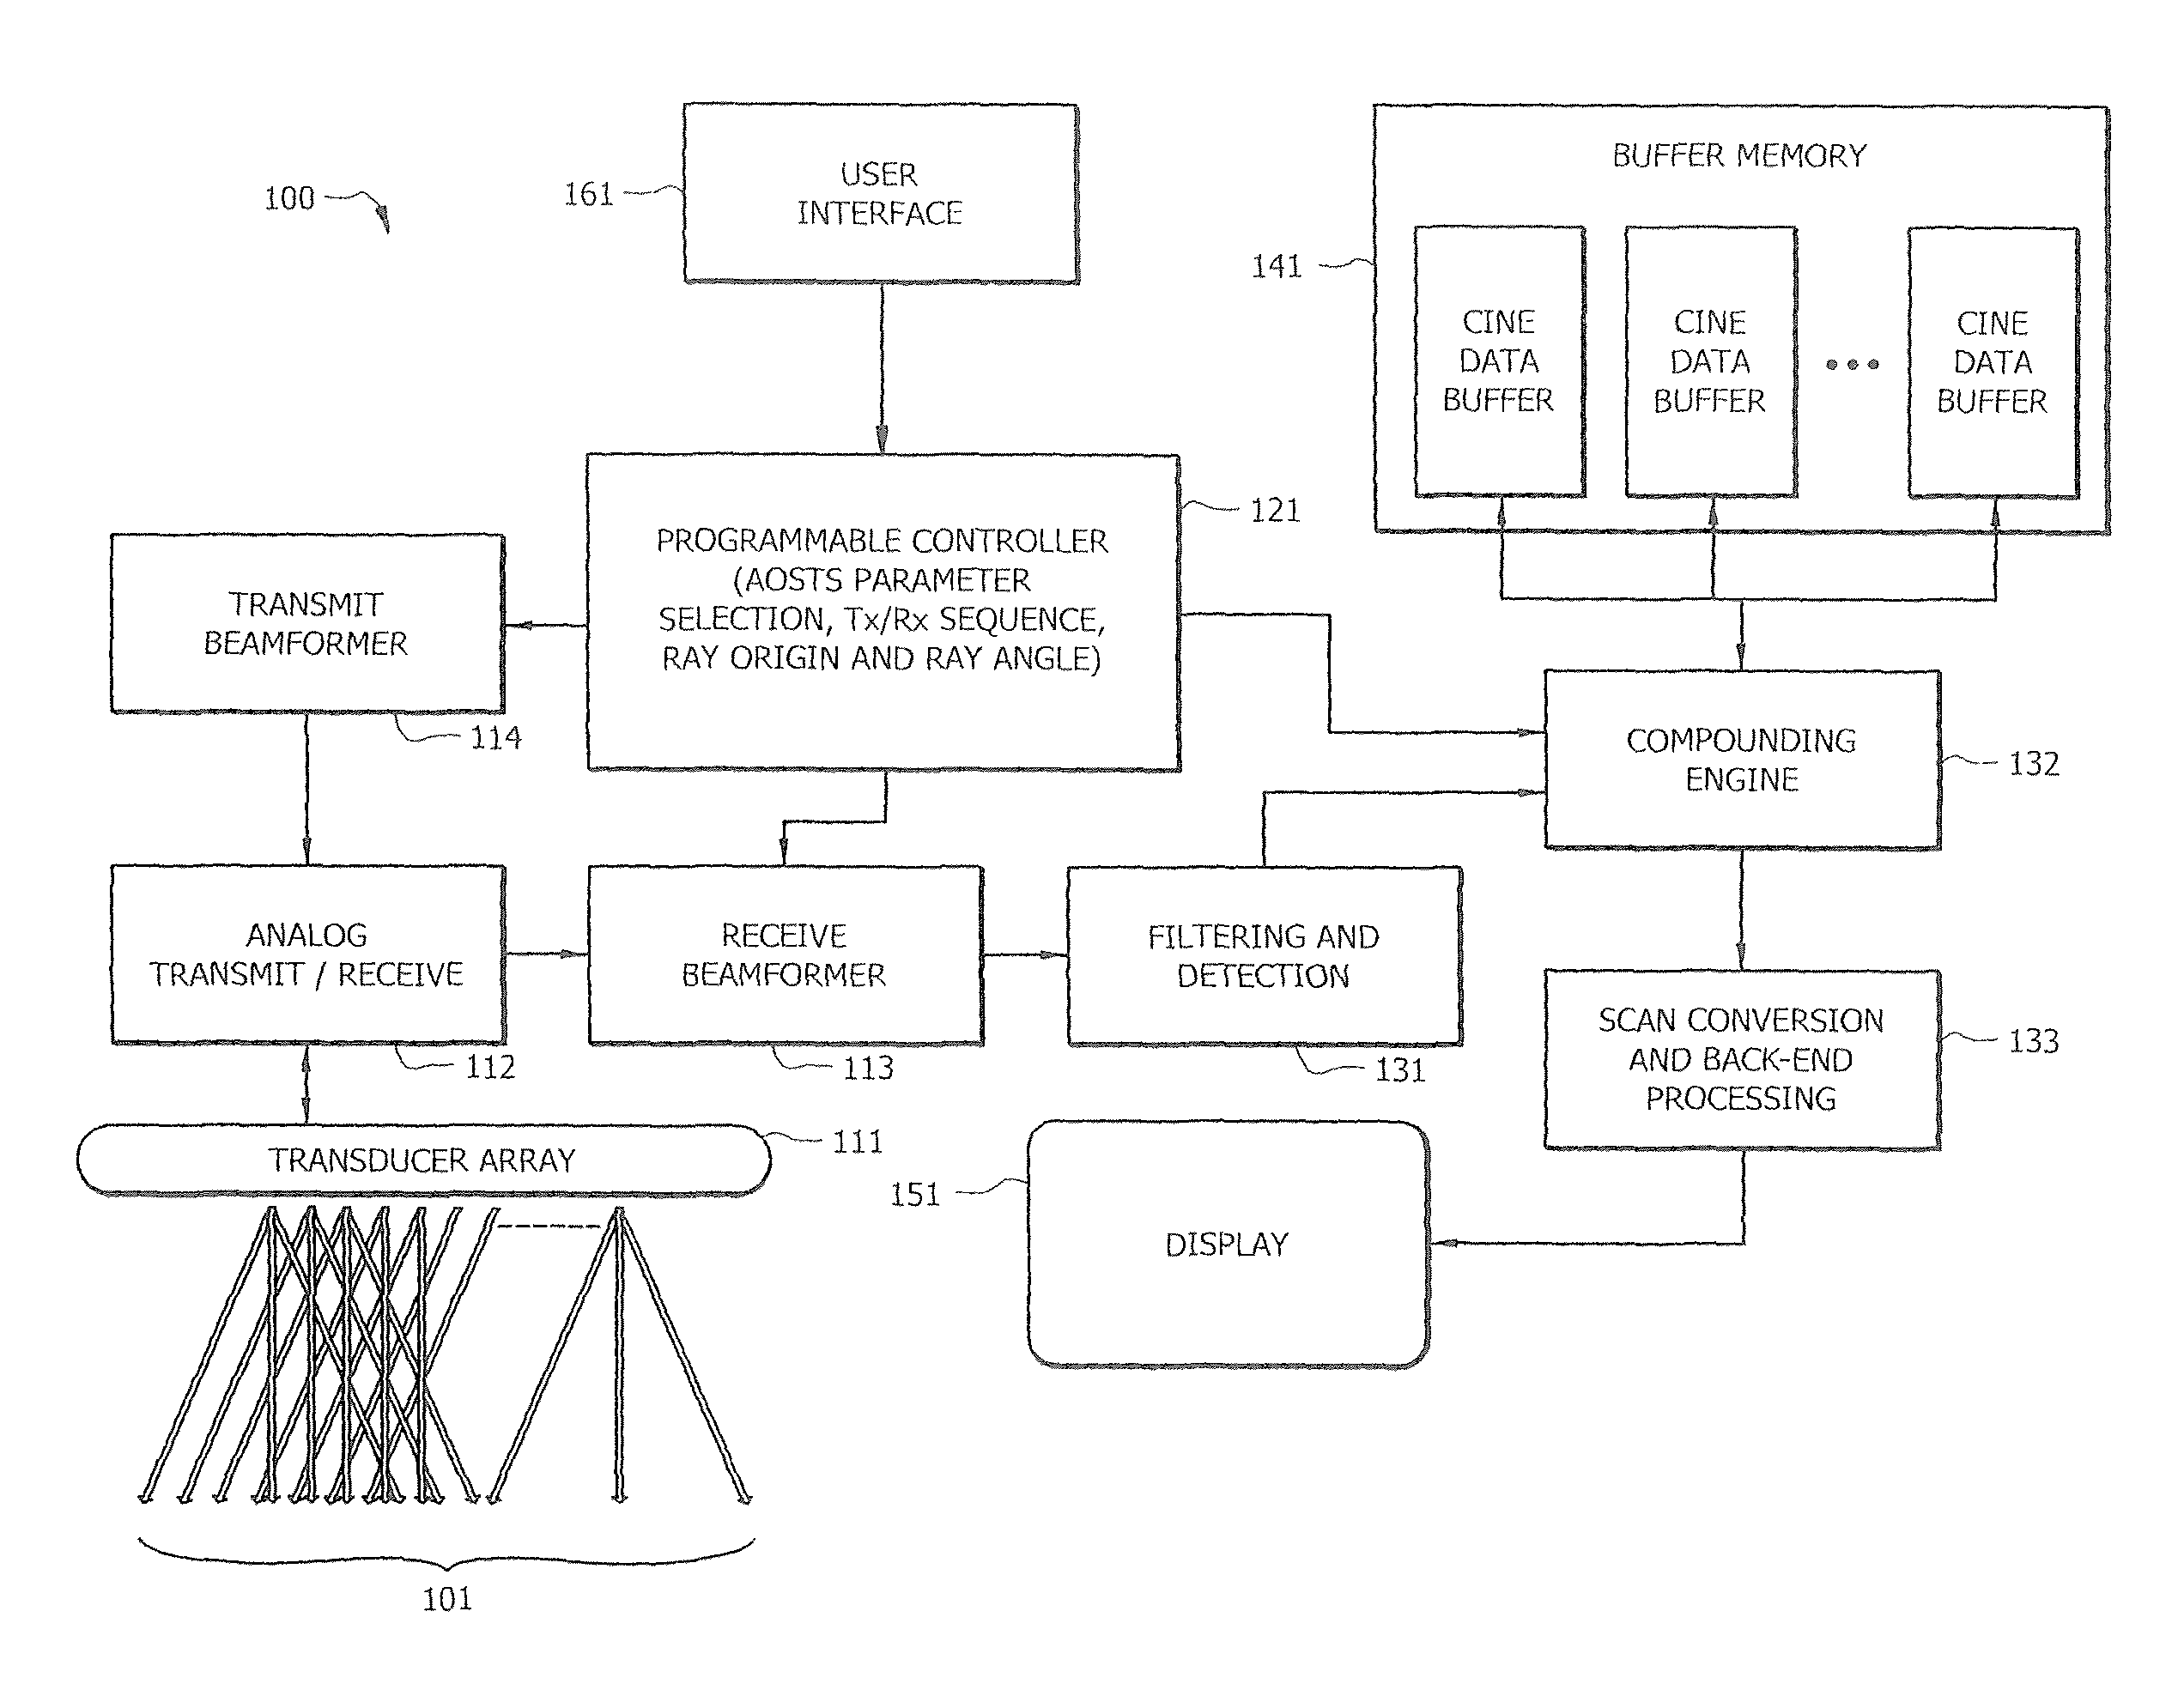 Systems and methods for active optimized spatio-temporal sampling